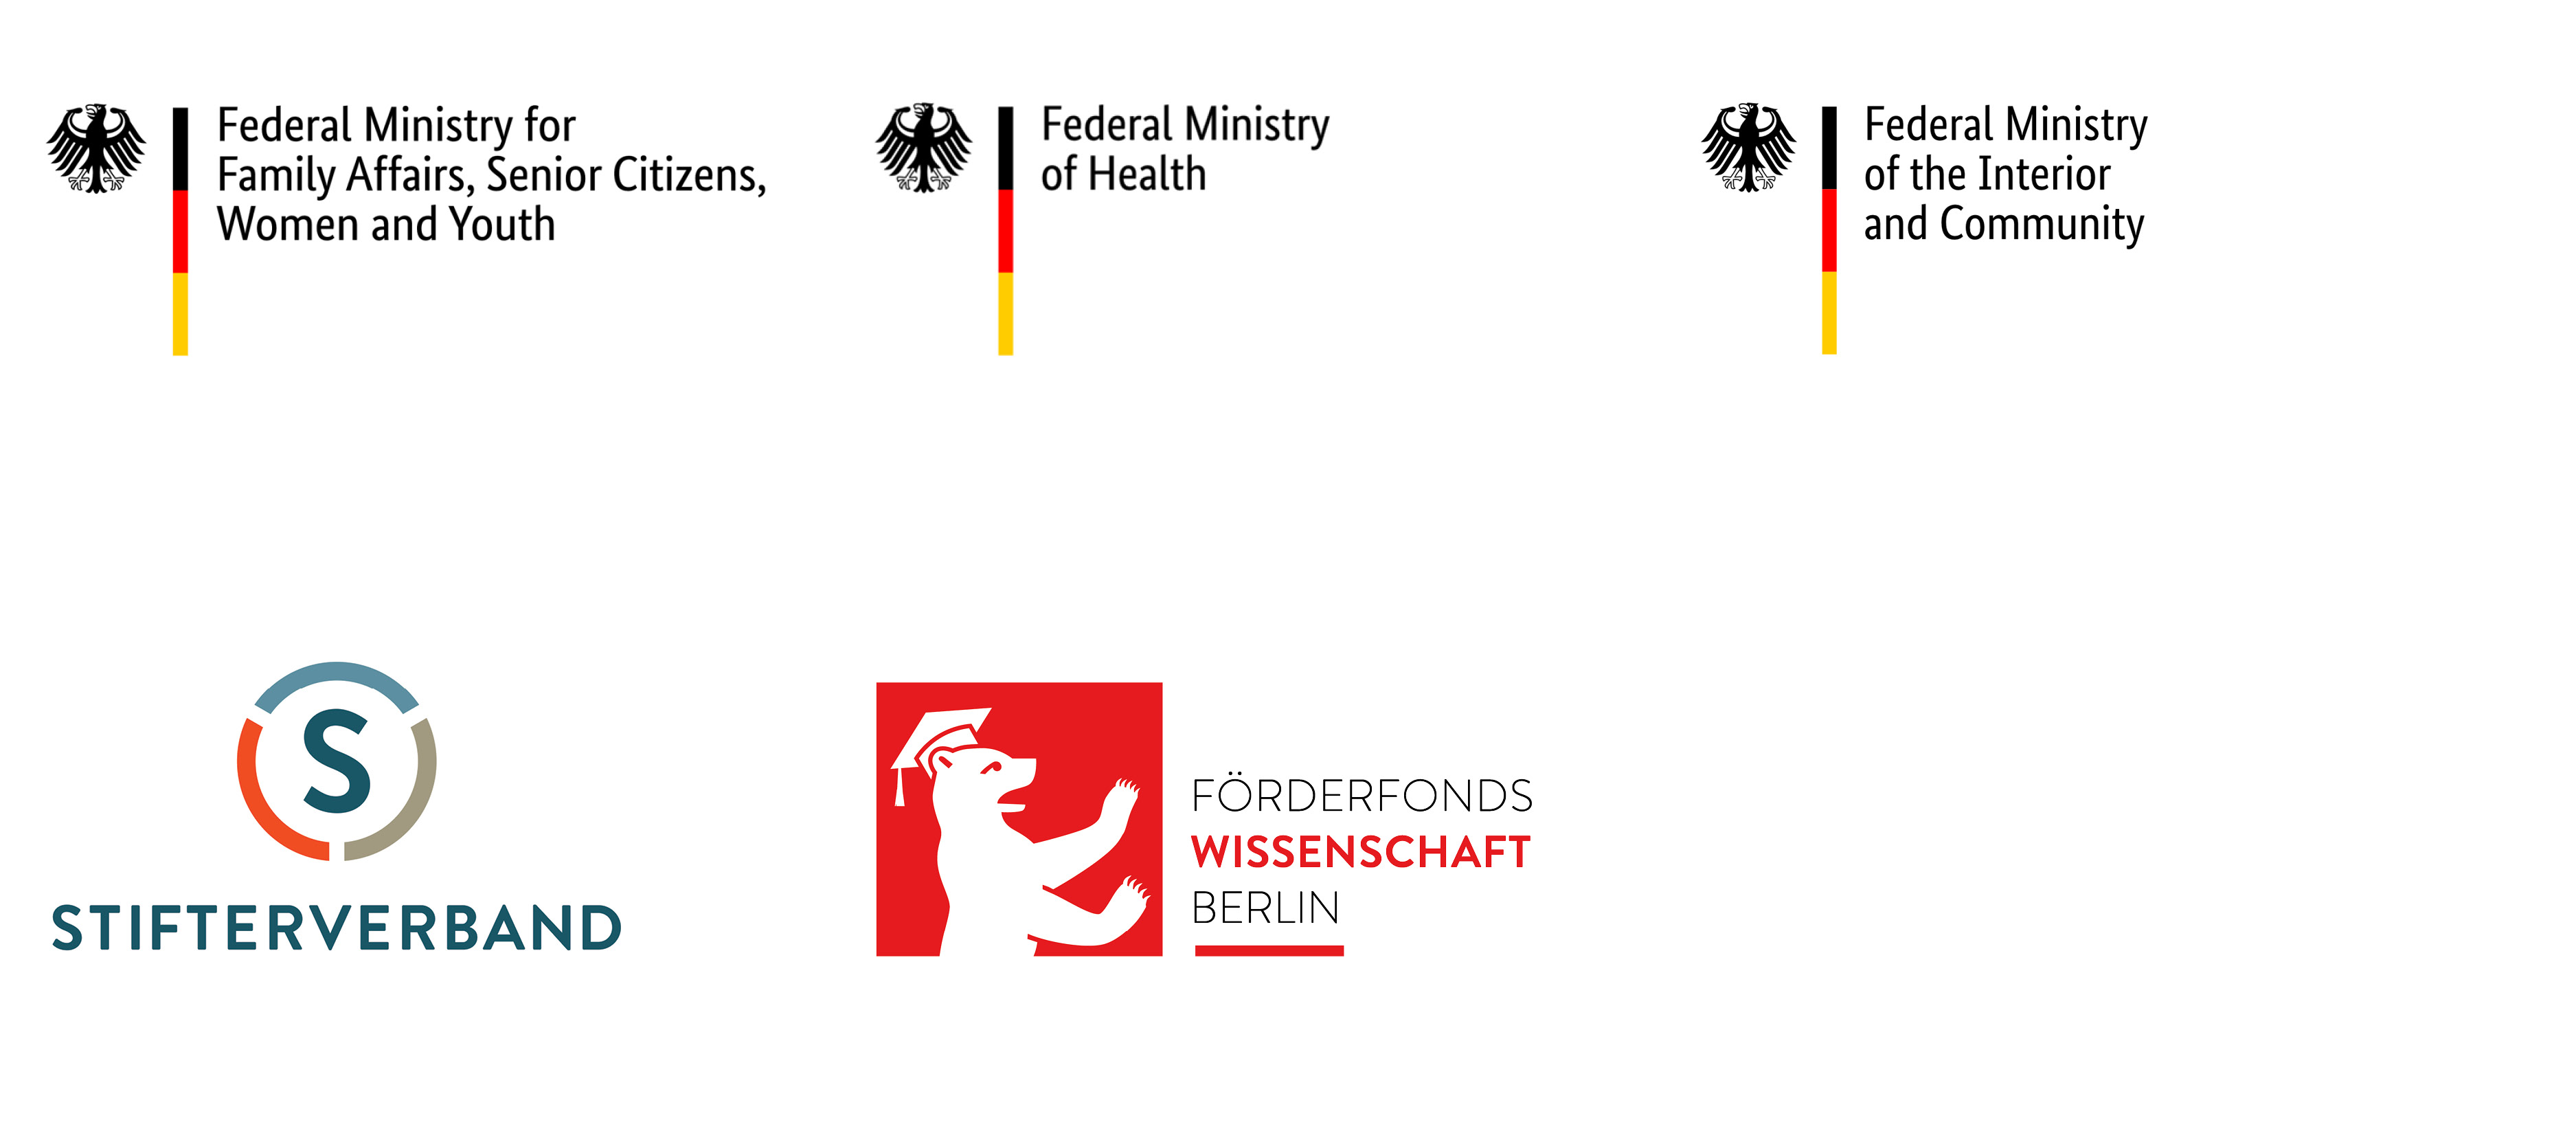 Logos of German Federal Ministry of the Interior and Community, German Federal Ministry for Family Affairs, Senior Citizens, Women and Youth, the German Federal Ministry of Health, the Stifterverband and the Förderfonds Wissenschaft in Berlin 